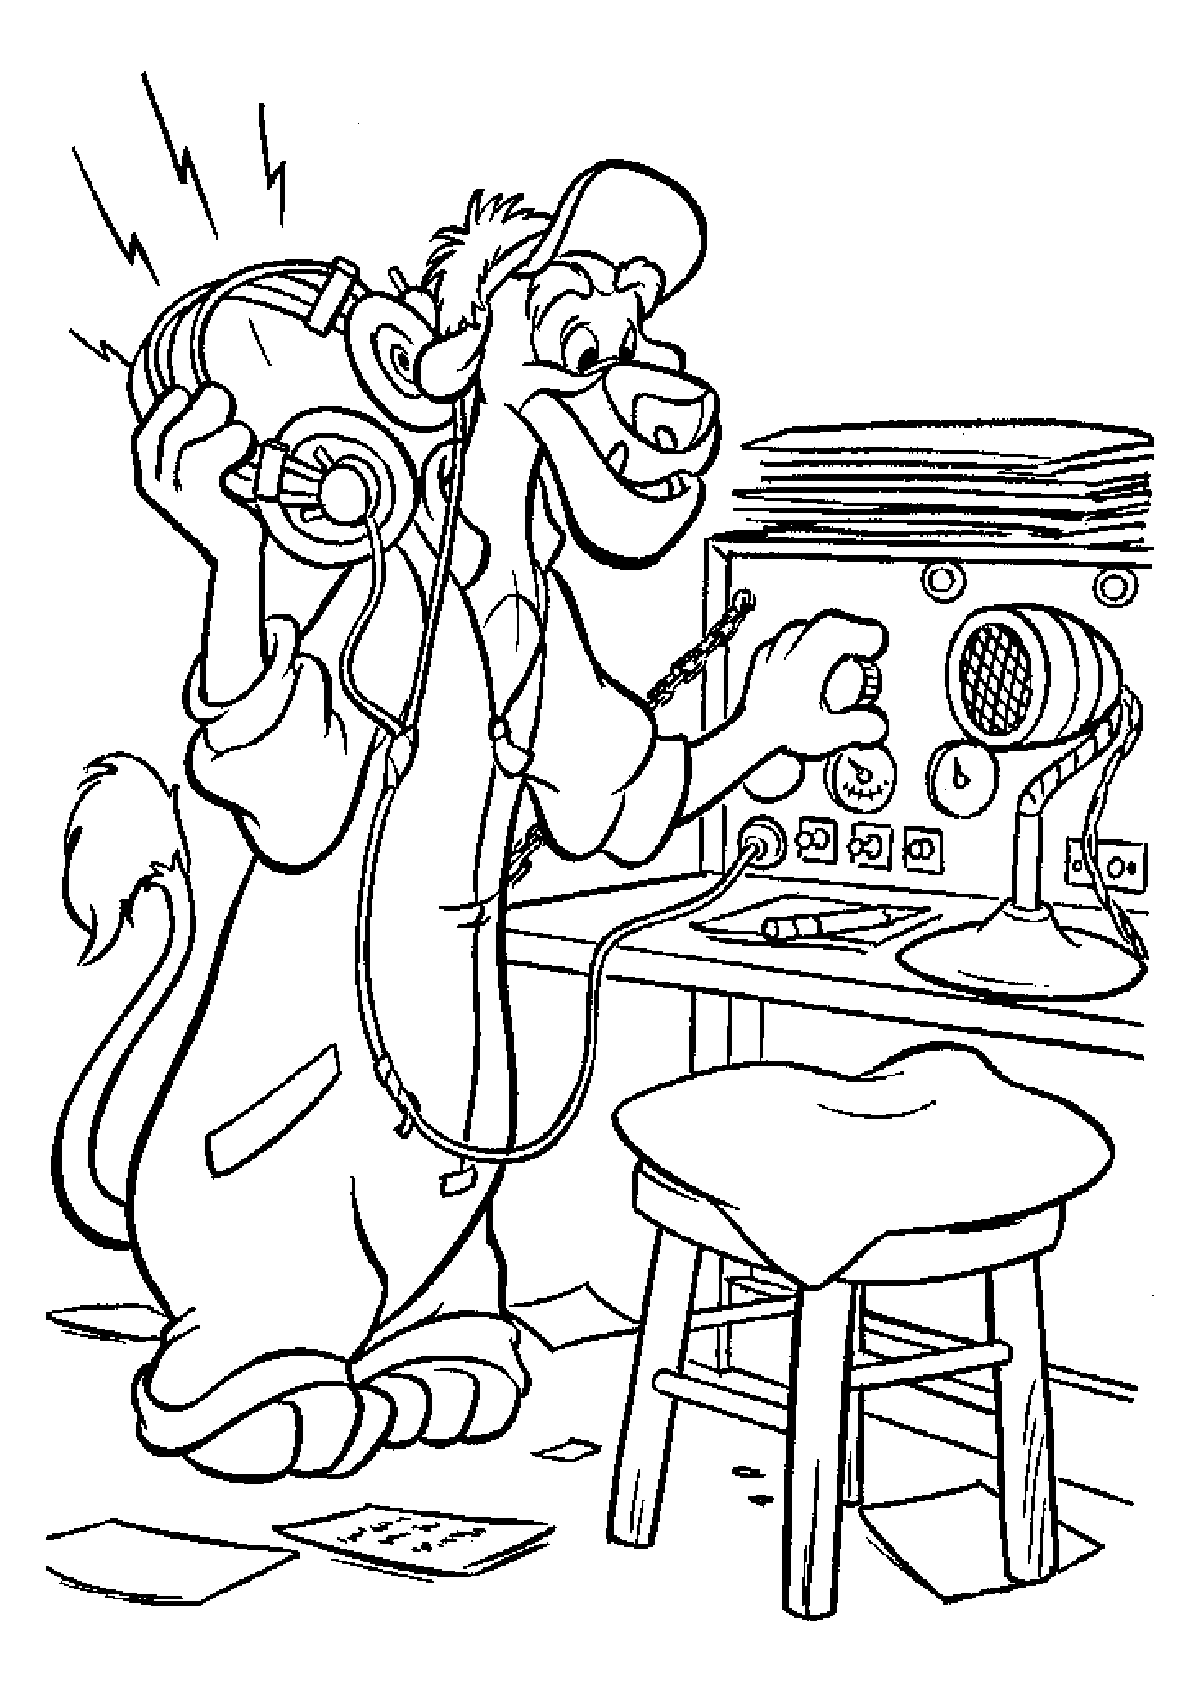 TaleSpin coloring pages to download and print for free